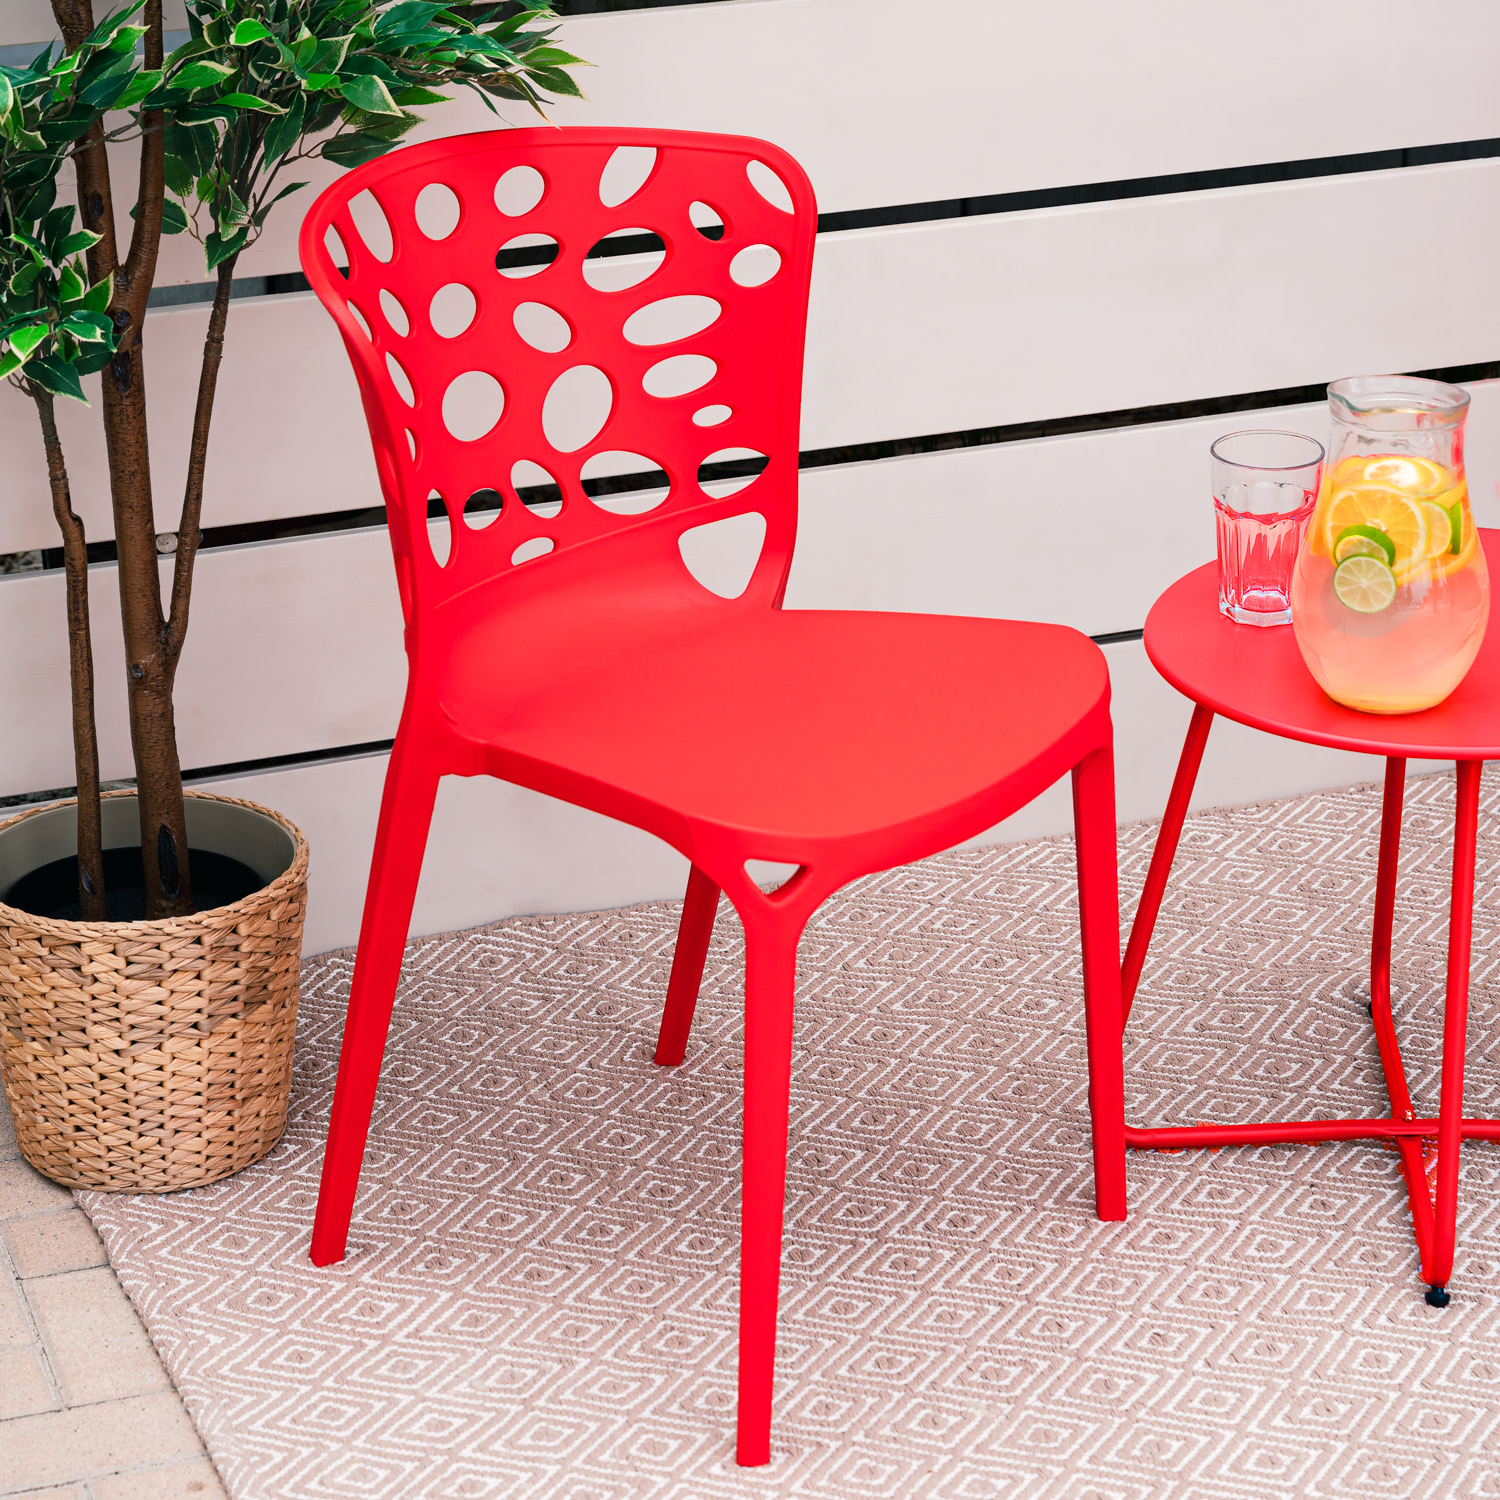 Garden chair Set of 6 Modern Red Camping chairs Outdoor chairs Plastic Stacking chairs Kitchen chairs